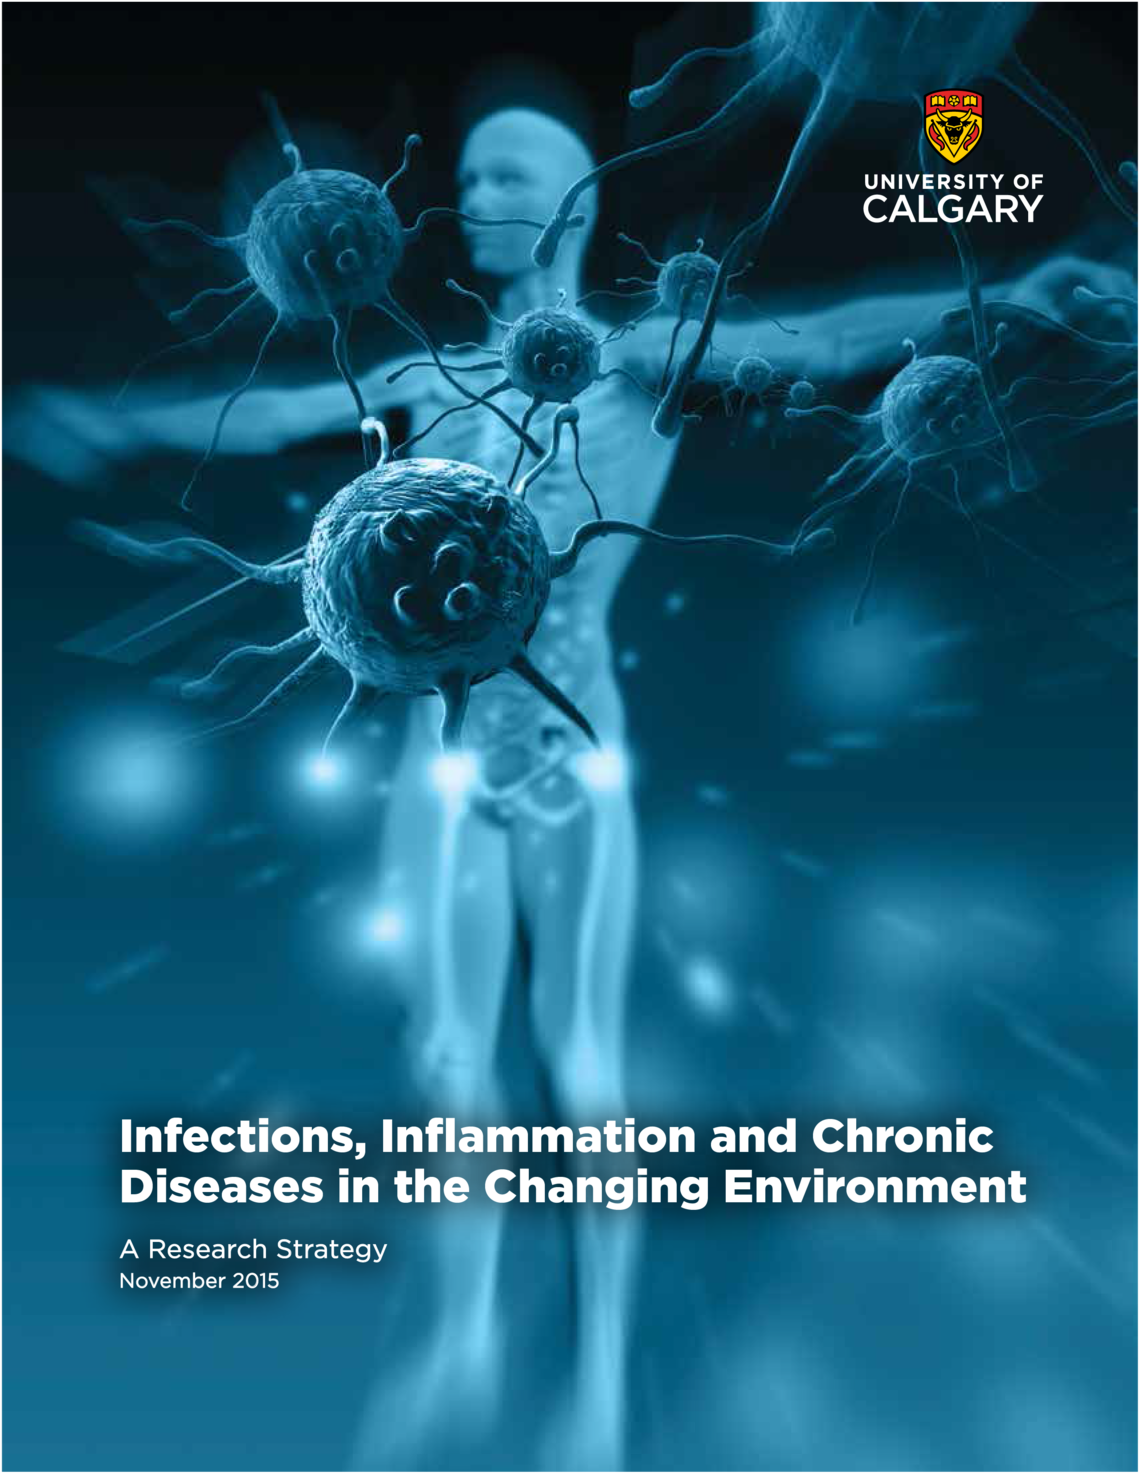 Through the Infections, Inflammation and Chronic Diseases in the Changing Environment research strategy, top scientists will lead multidisciplinary teams to understand and prevent the complex factors that threaten our health and economies.    